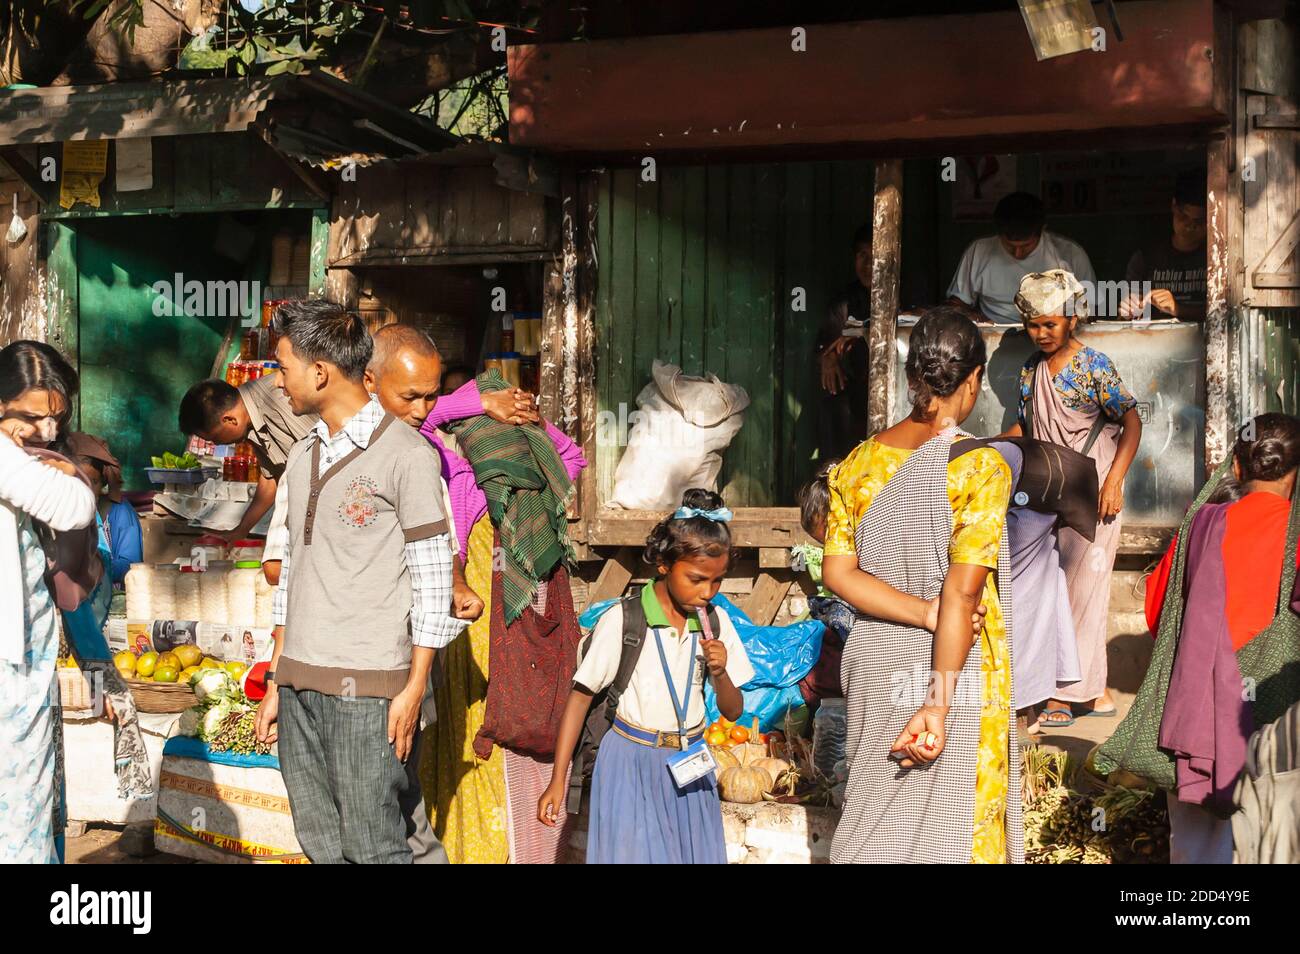 A crowd of people throng a roadside market on the Shillong-Guwahati highway, Meghalaya, India. Stock Photo